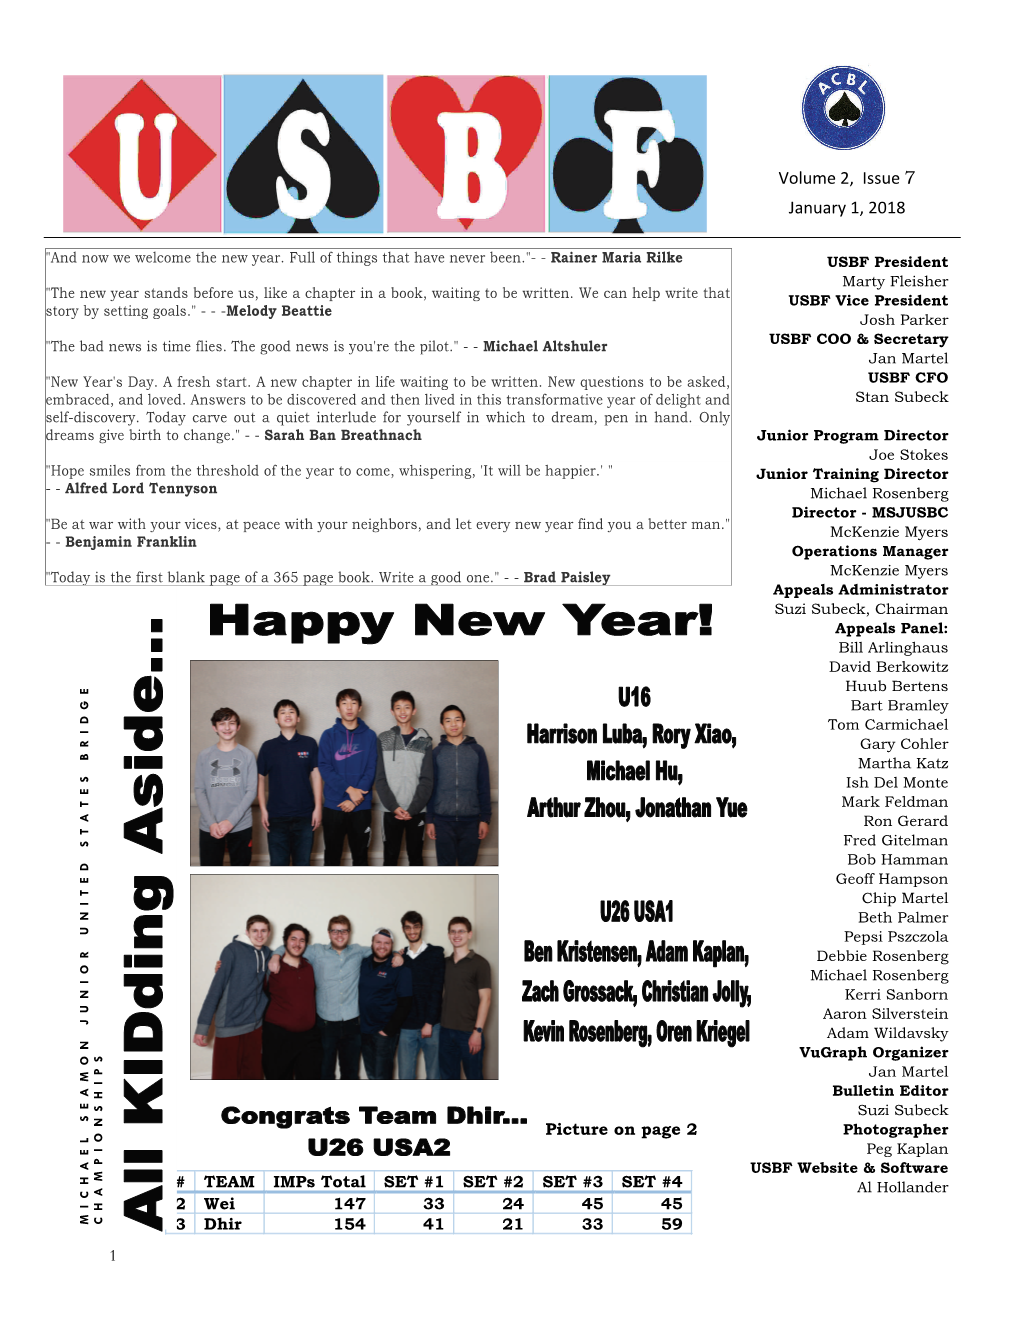 Volume 2, Issue 7 January 1, 2018